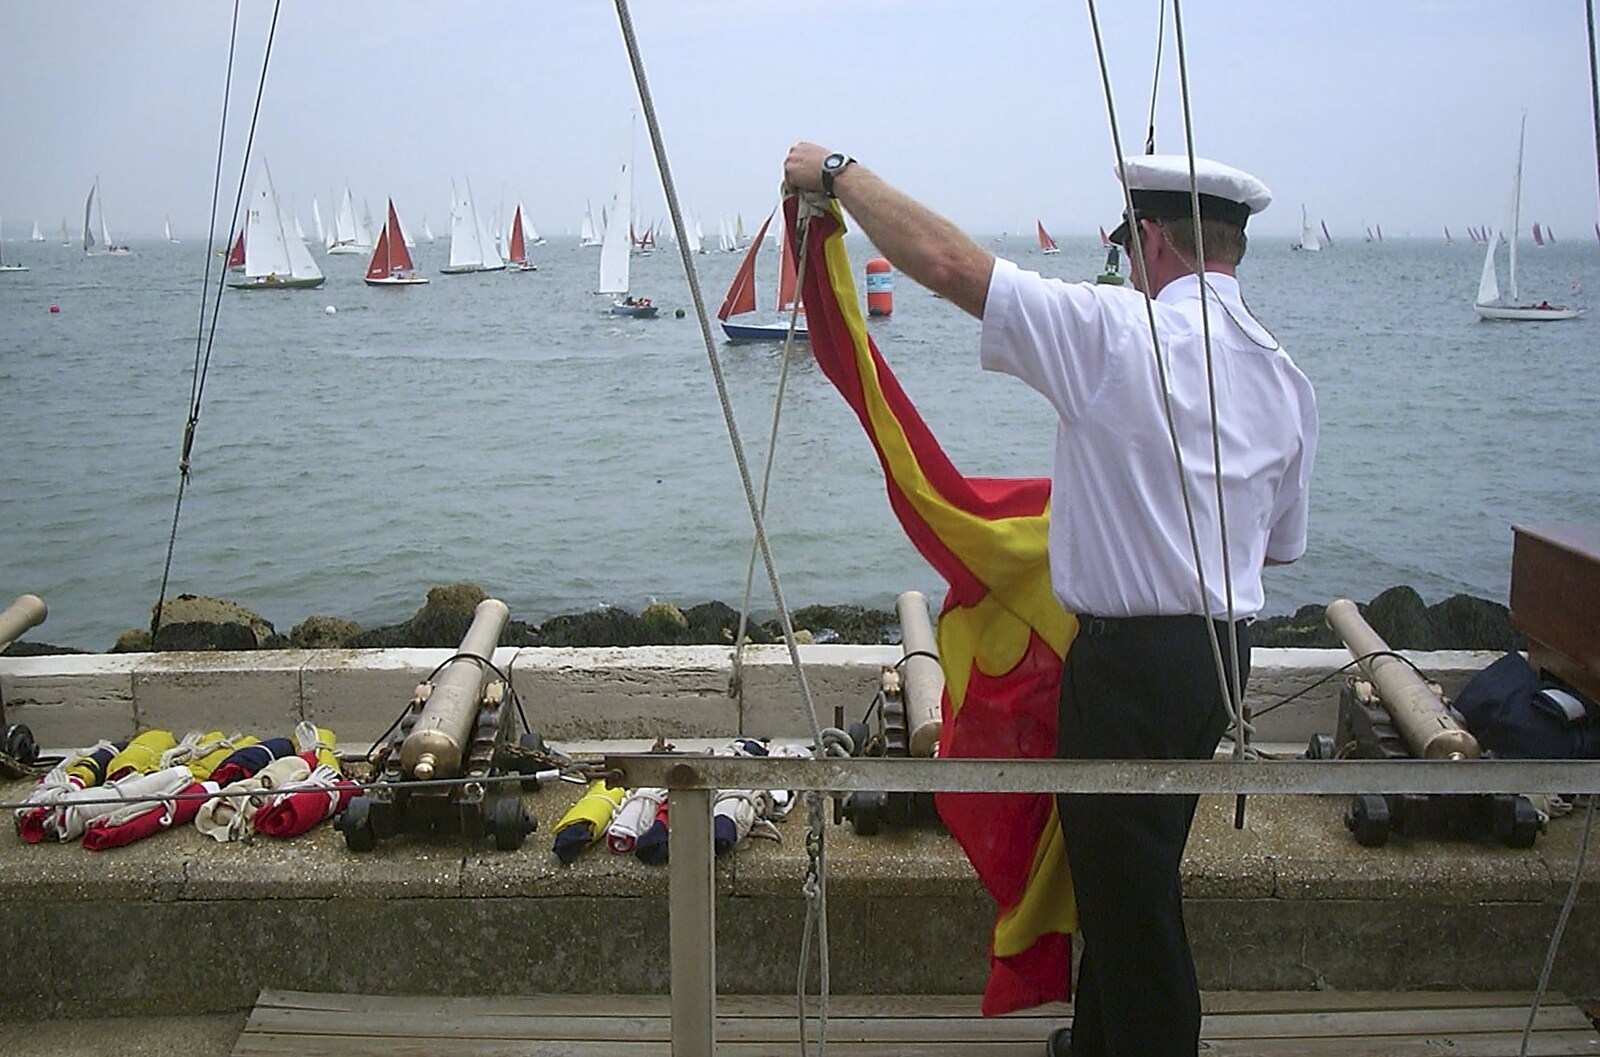 Pennants are unfurled from Cowes Weekend, Cowes, Isle of Wight - 7th August 2004